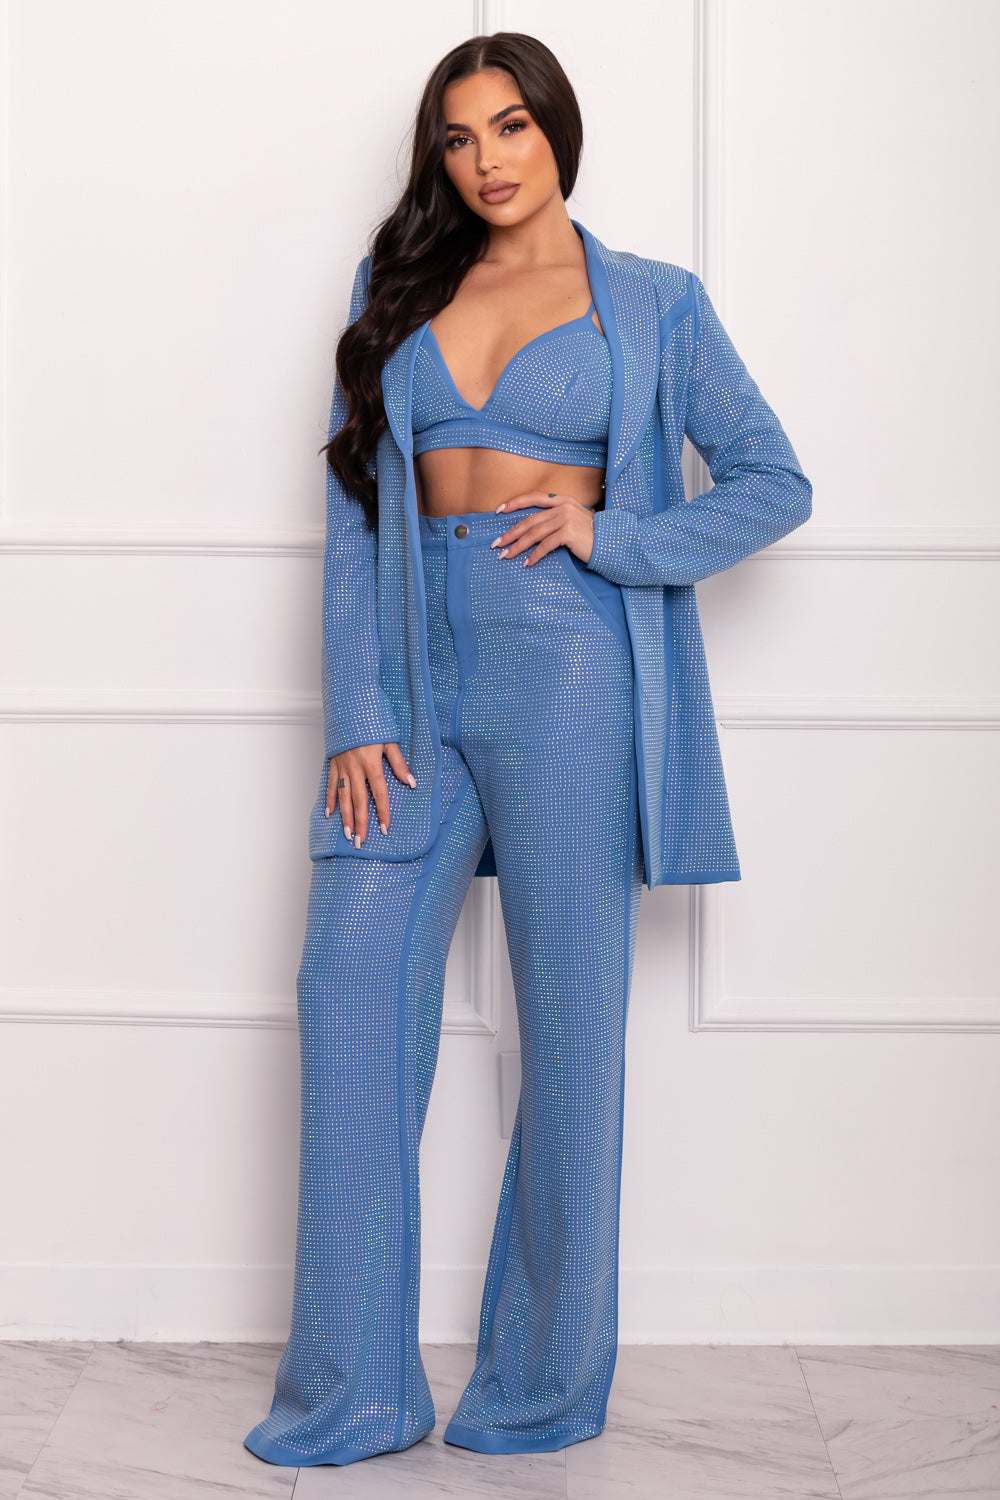 White Crystal Mesh Blazer with Pants and a bralette-style top